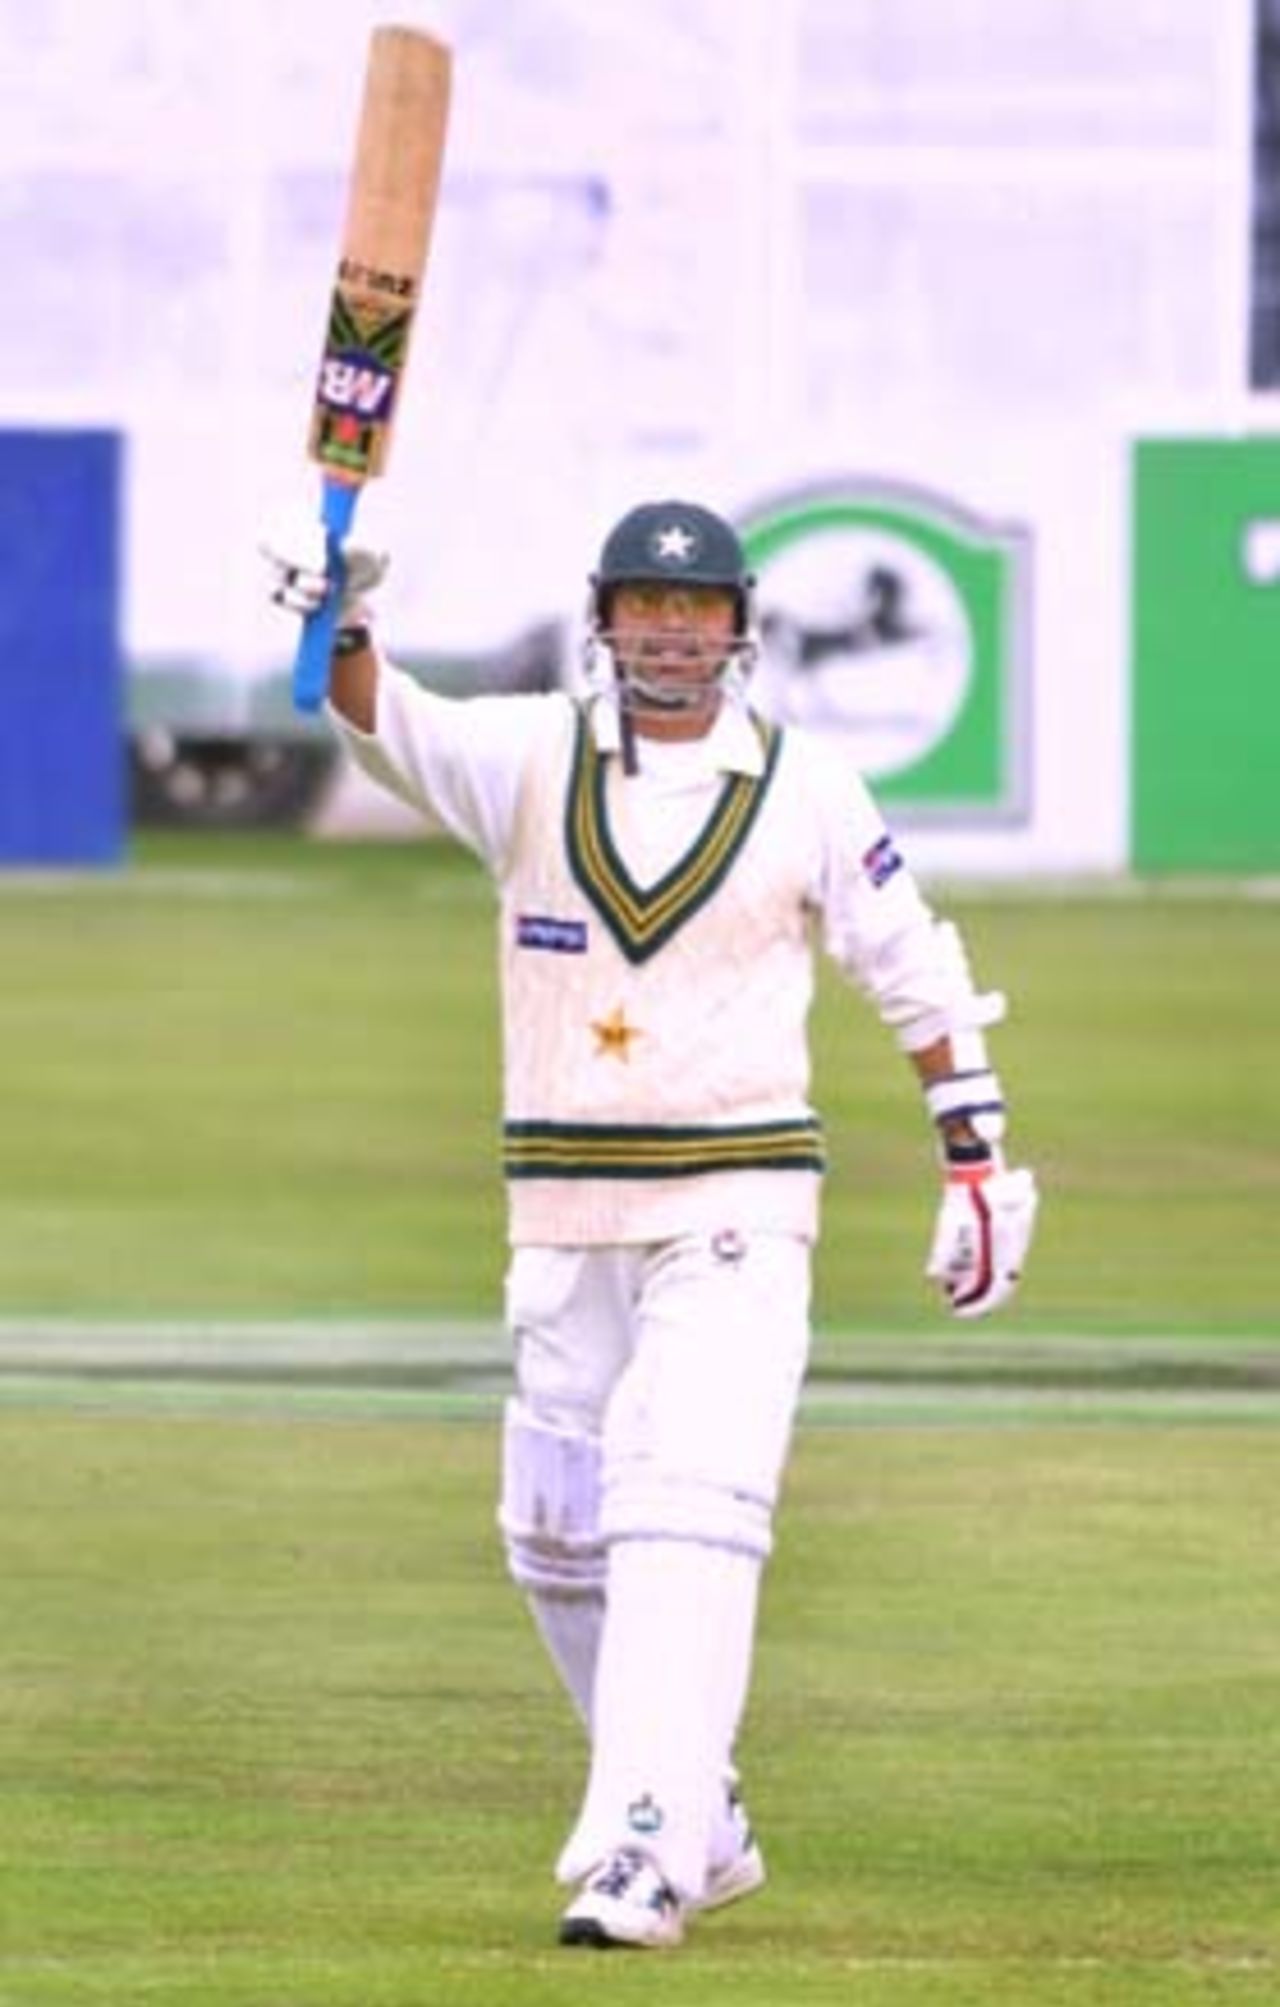 Pakistan lower order batsman Saqlain Mushtaq raises his bat in celebration of reaching his maiden Test century. Saqlain went on to score 101 not out before Pakistan declared their first innings at 571/8. 2nd Test: New Zealand v Pakistan at Jade Stadium, Christchurch, 15-19 March 2001 (19 March 2001).